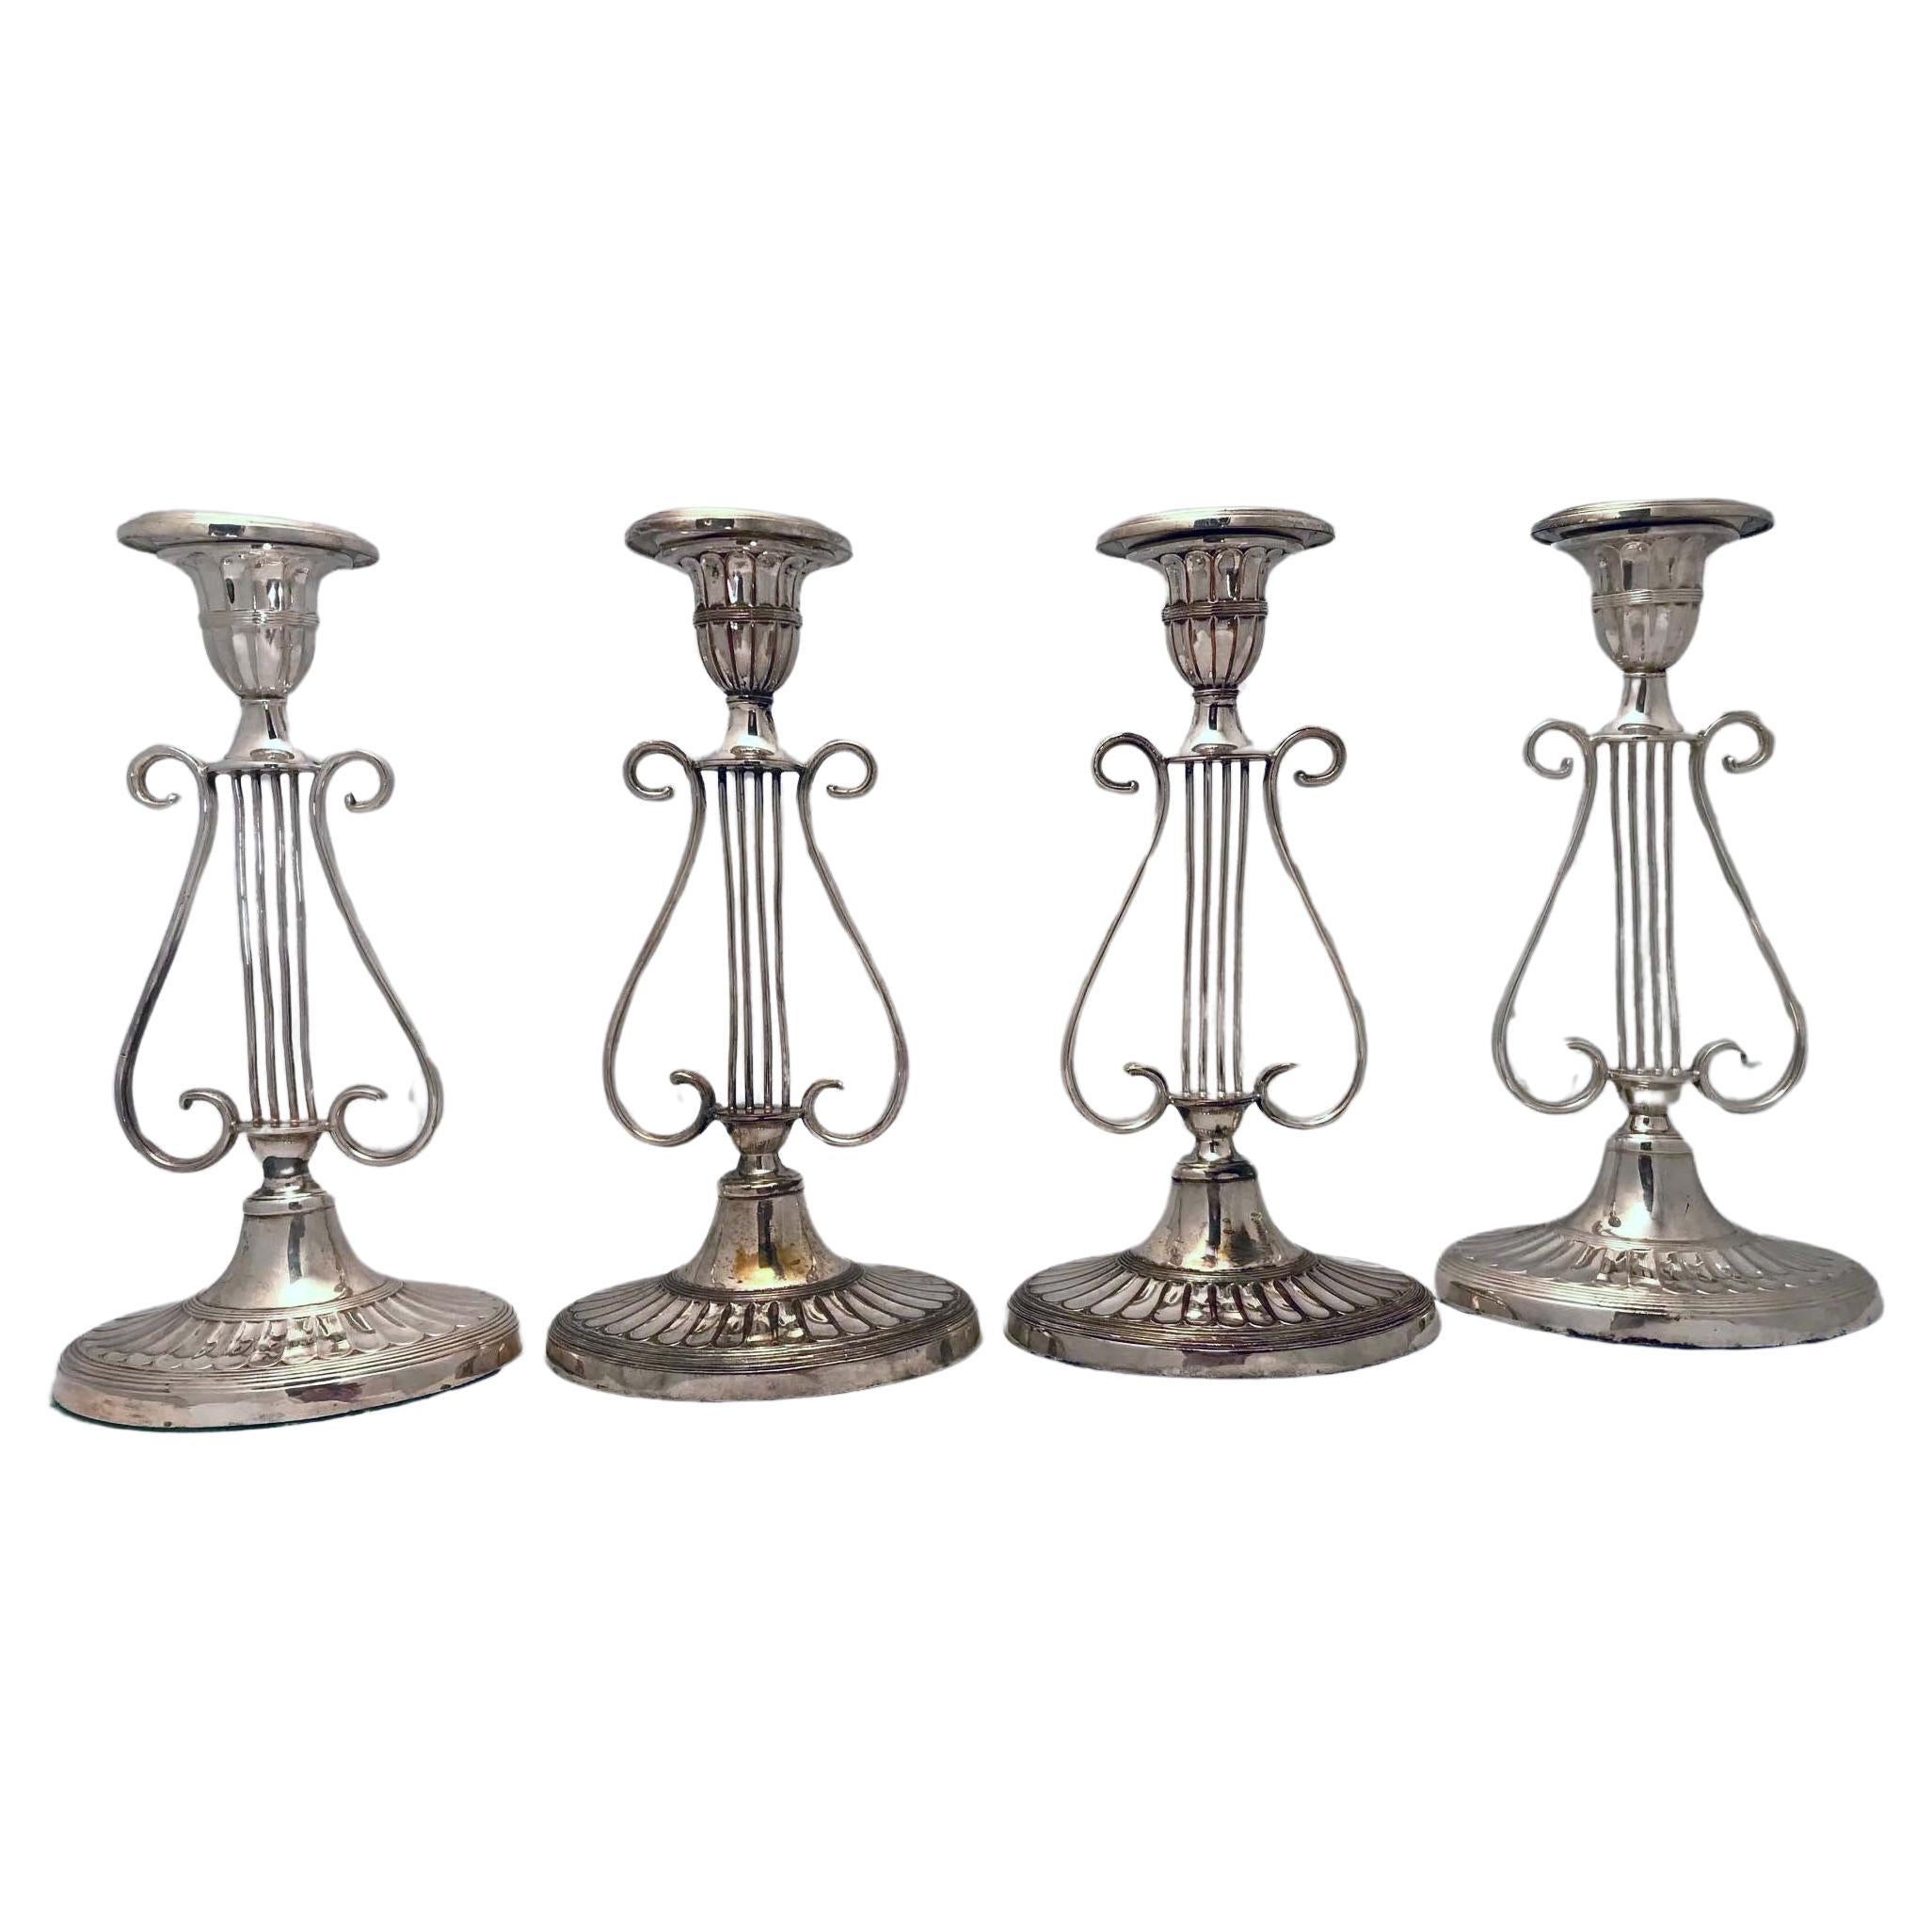 Set of Four Victorian  Neo-Classical Revival Lyre-Shaped  Candlesticks For Sale